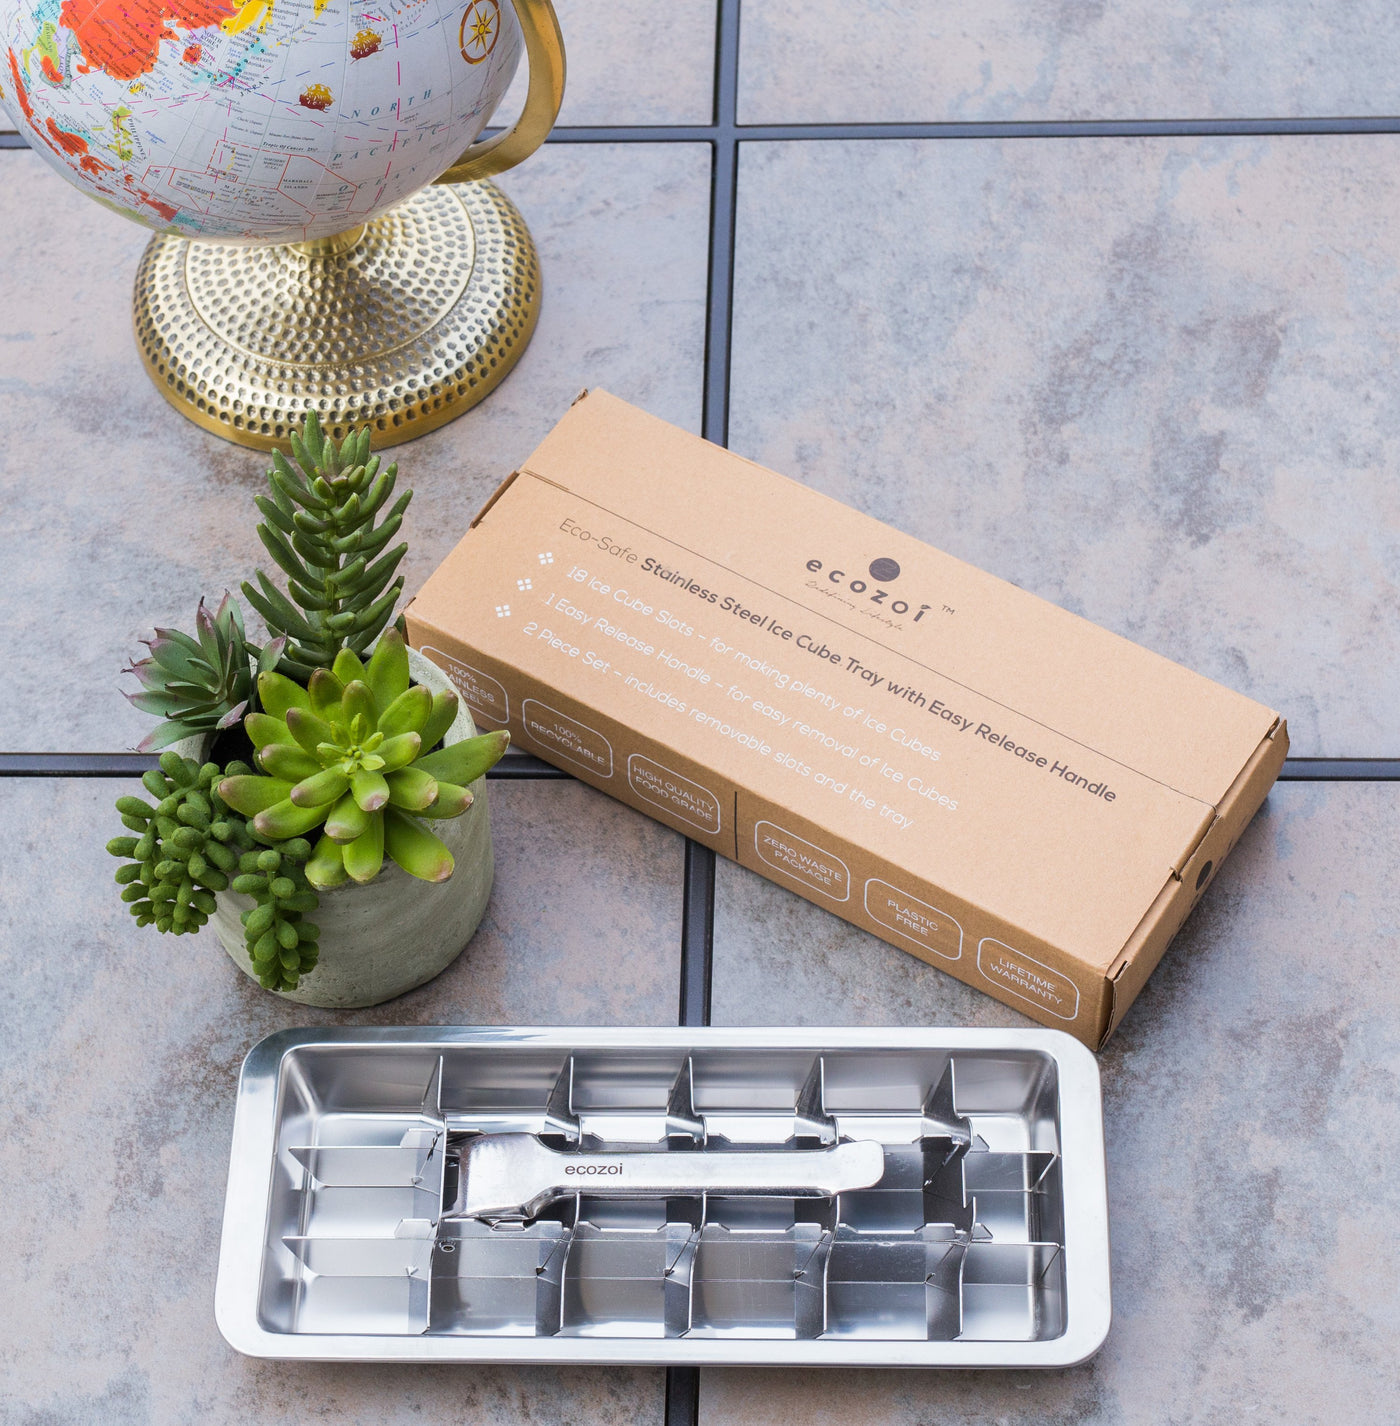 Metal Ice Cube Tray Made with Stainless Steel